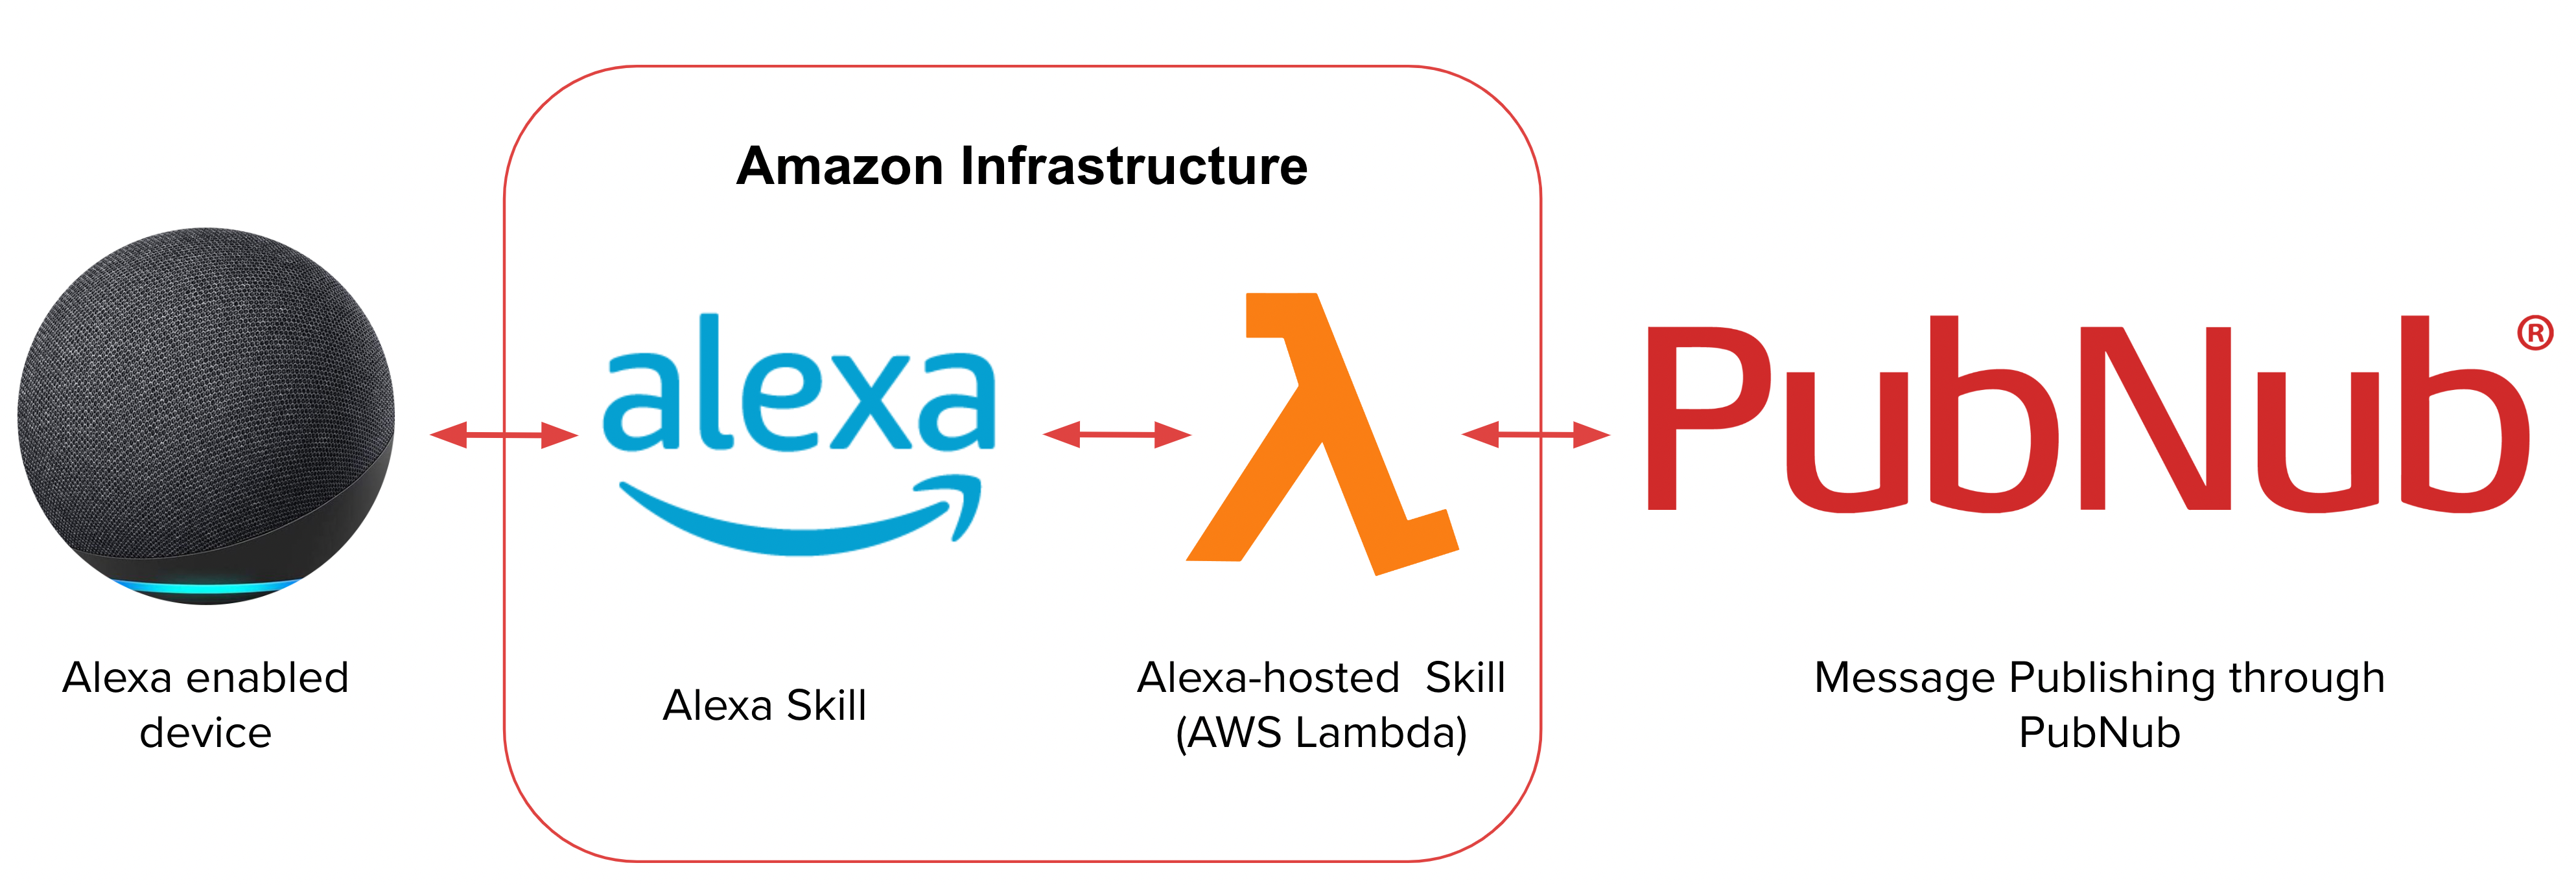 Architecture for Following Requests to Alexa with PubNub